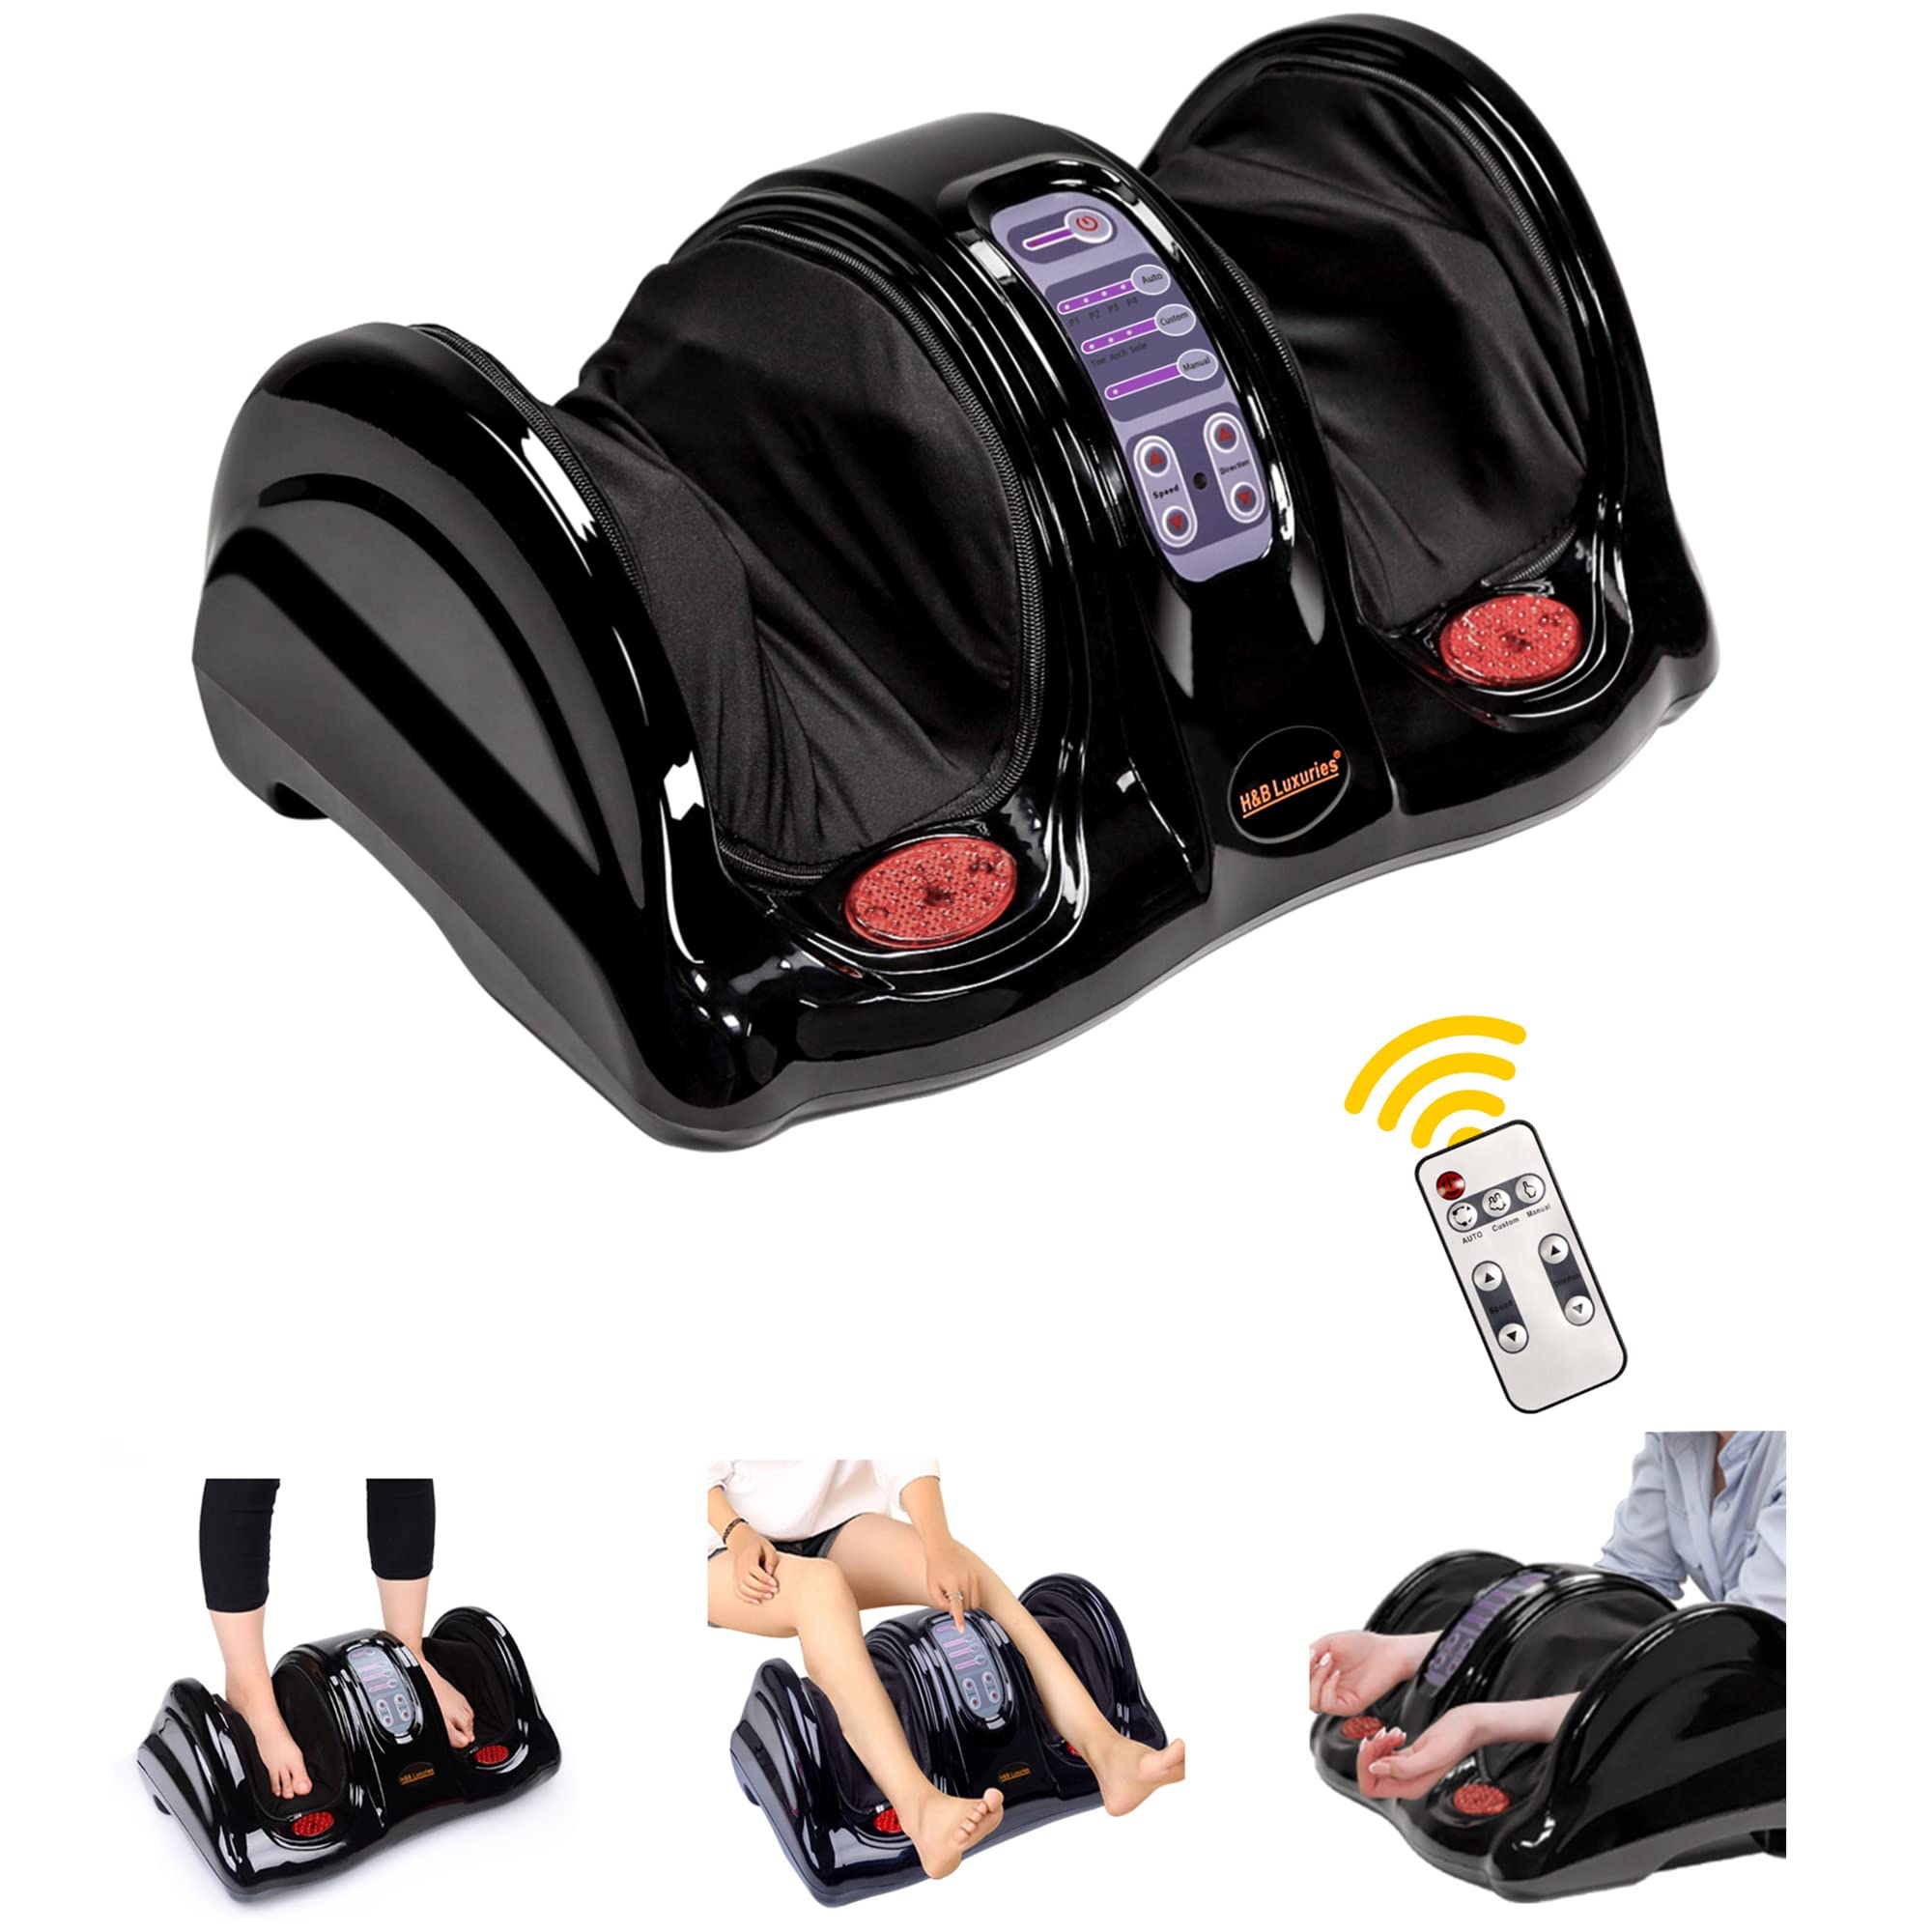 H&B Luxuries Shiatsu Foot Massager Machine with Remote Control, Kneading and Rolling Home Massagers for Feet, Ankle, Calf, Leg, 